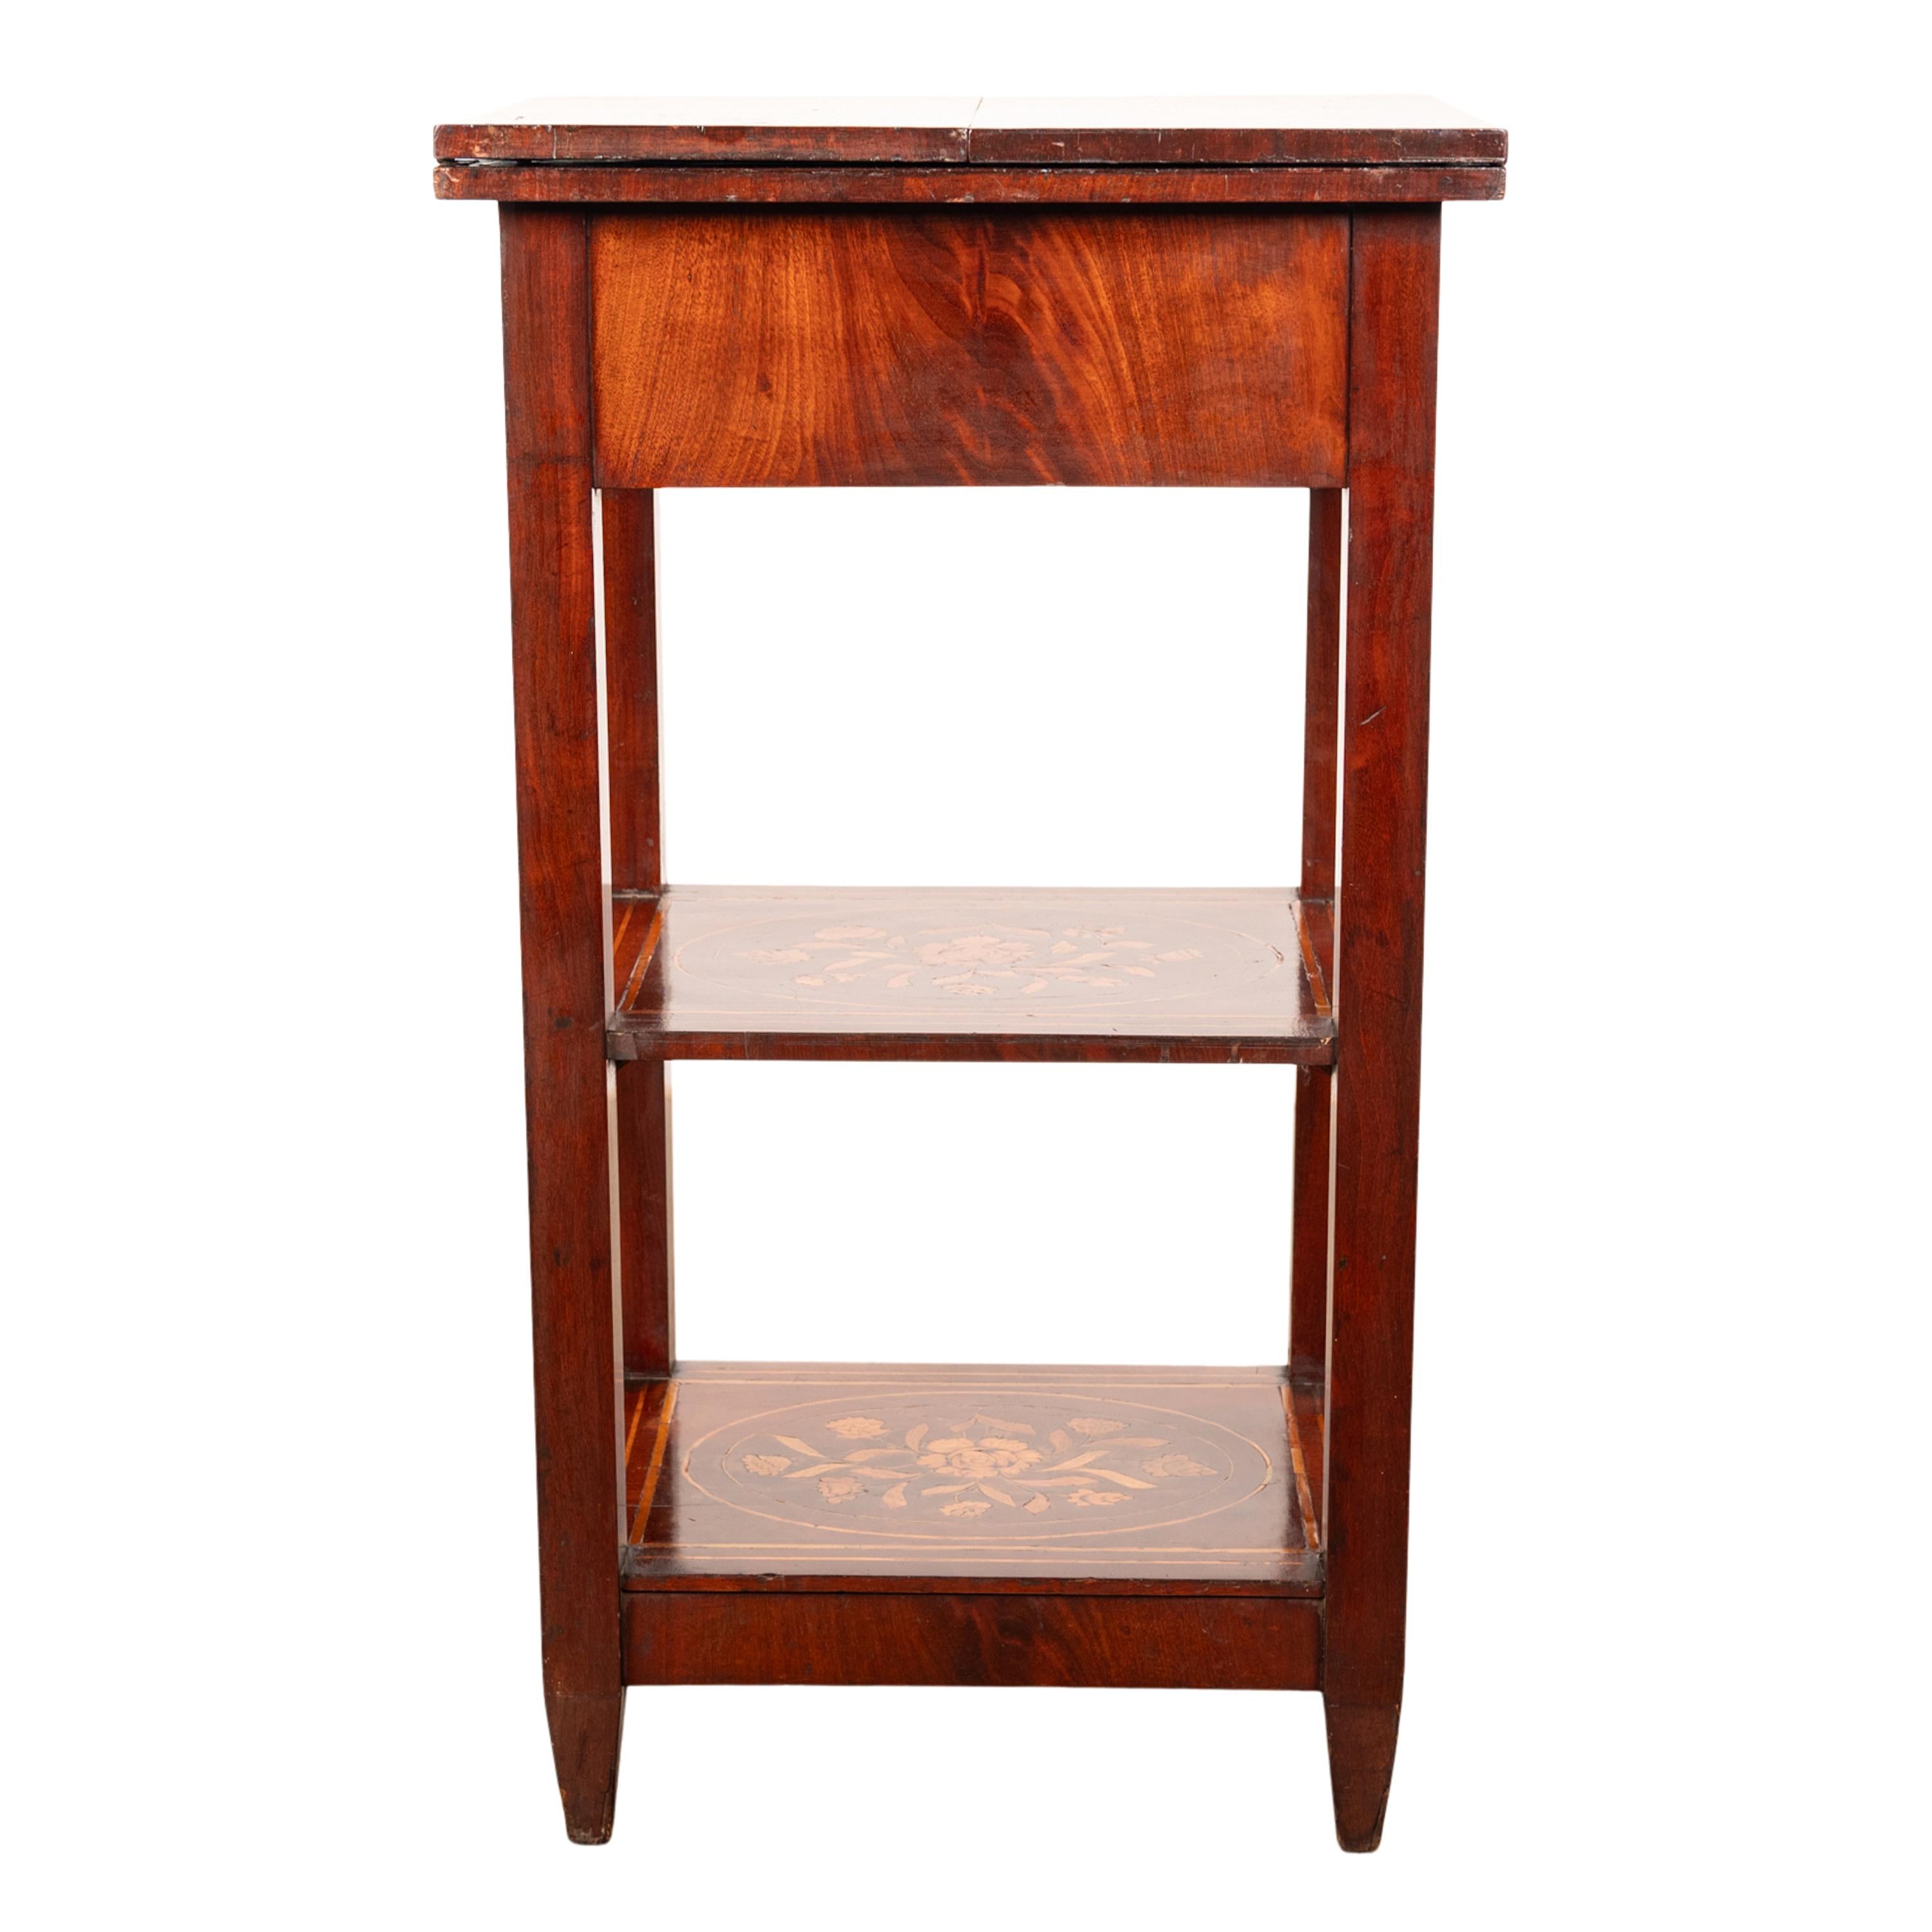 Antique Dutch Georgian Marquetry Foldout Rosewood Satinwood Table Etagere 1820 For Sale 2